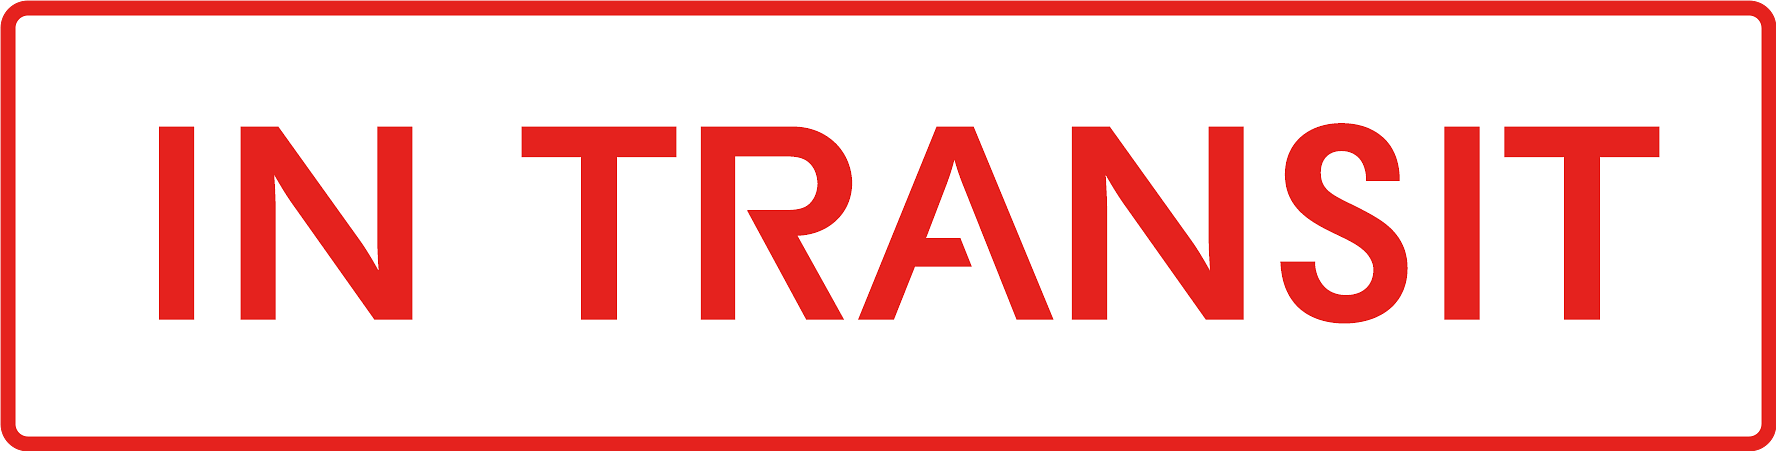 In transit text